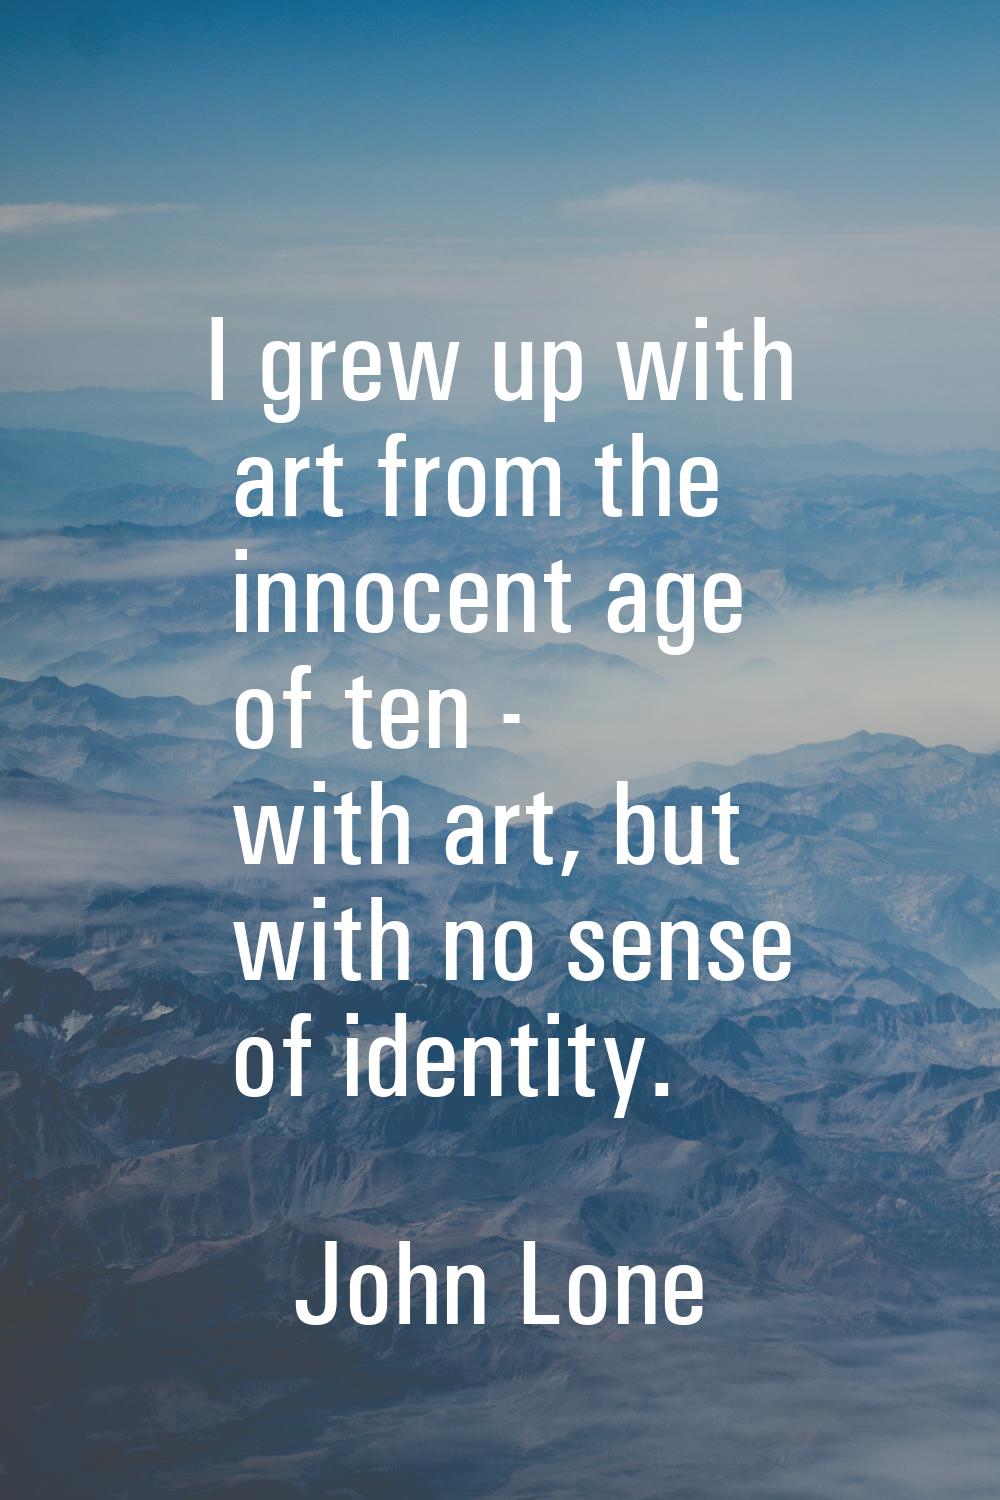 I grew up with art from the innocent age of ten - with art, but with no sense of identity.